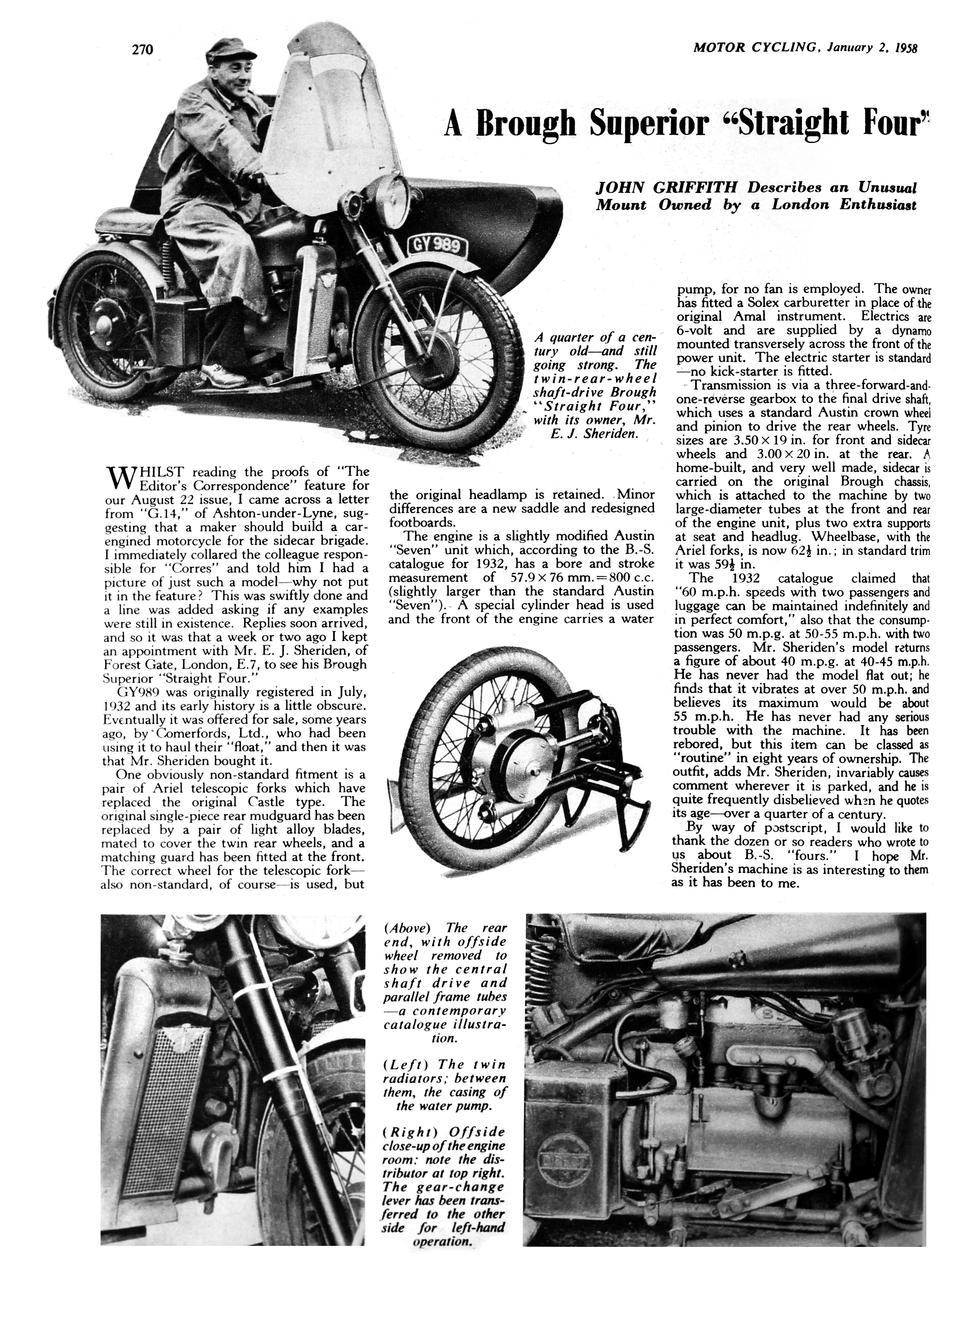 From the estate of the late Frank Vague, The ex-Hubert Chantrey,1932 Brough Superior 800cc Model BS4 Project Frame no. 4004 Engine no. M131039